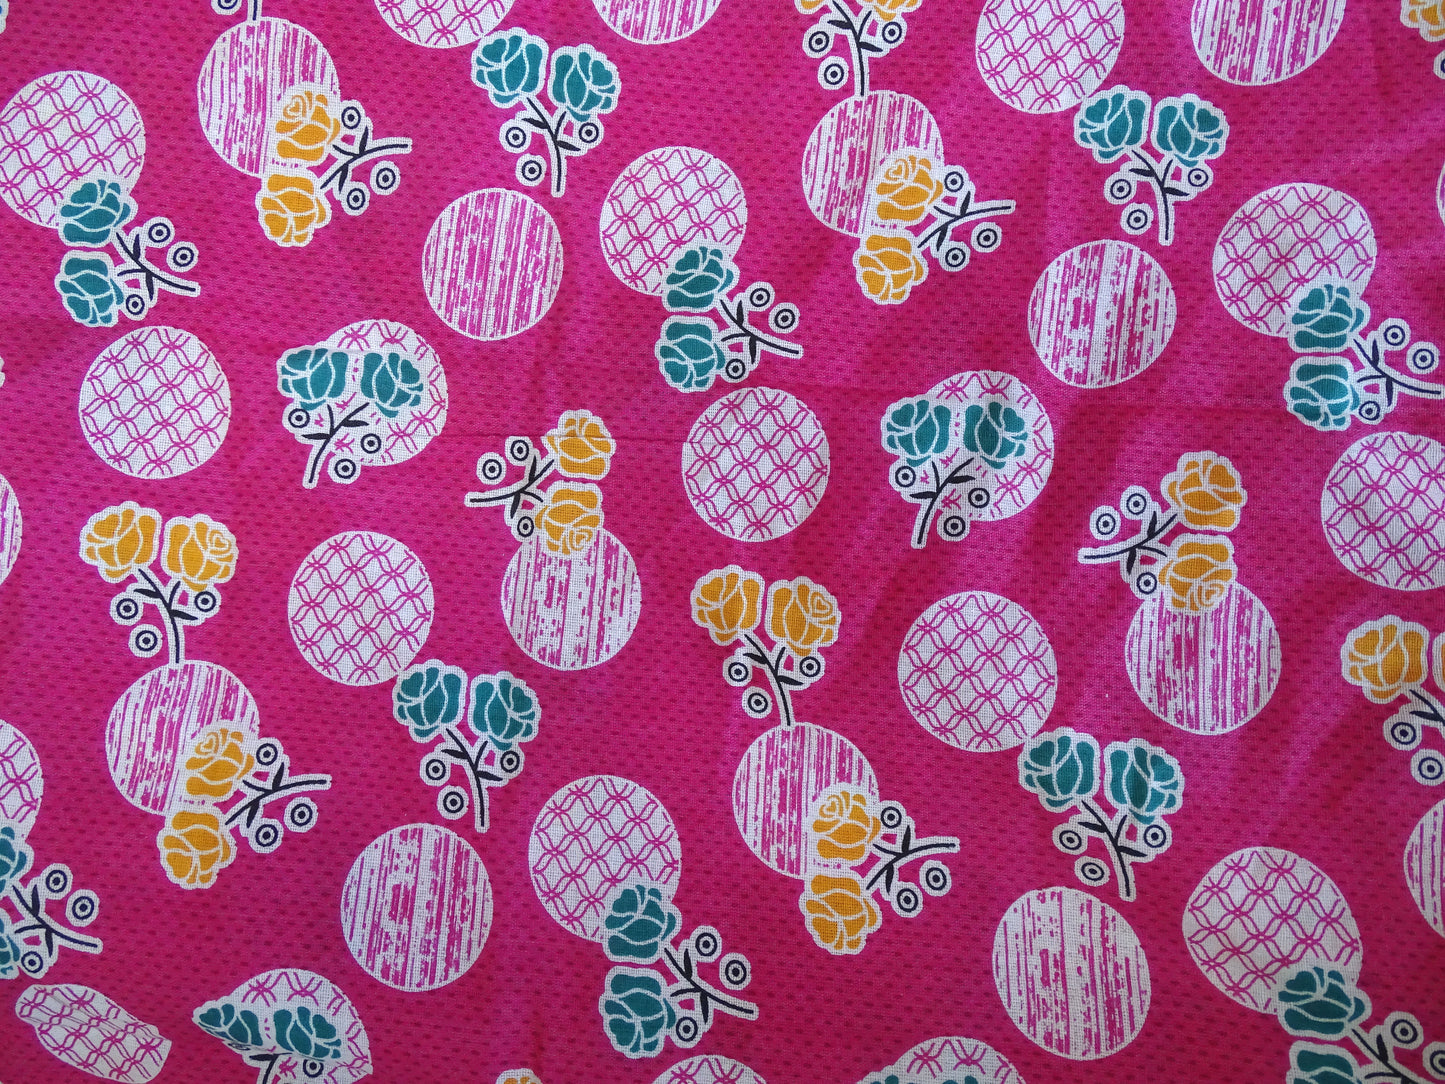 Nighty for Women Cotton Printed, Free Size, Pink Colour (Pack of 1)